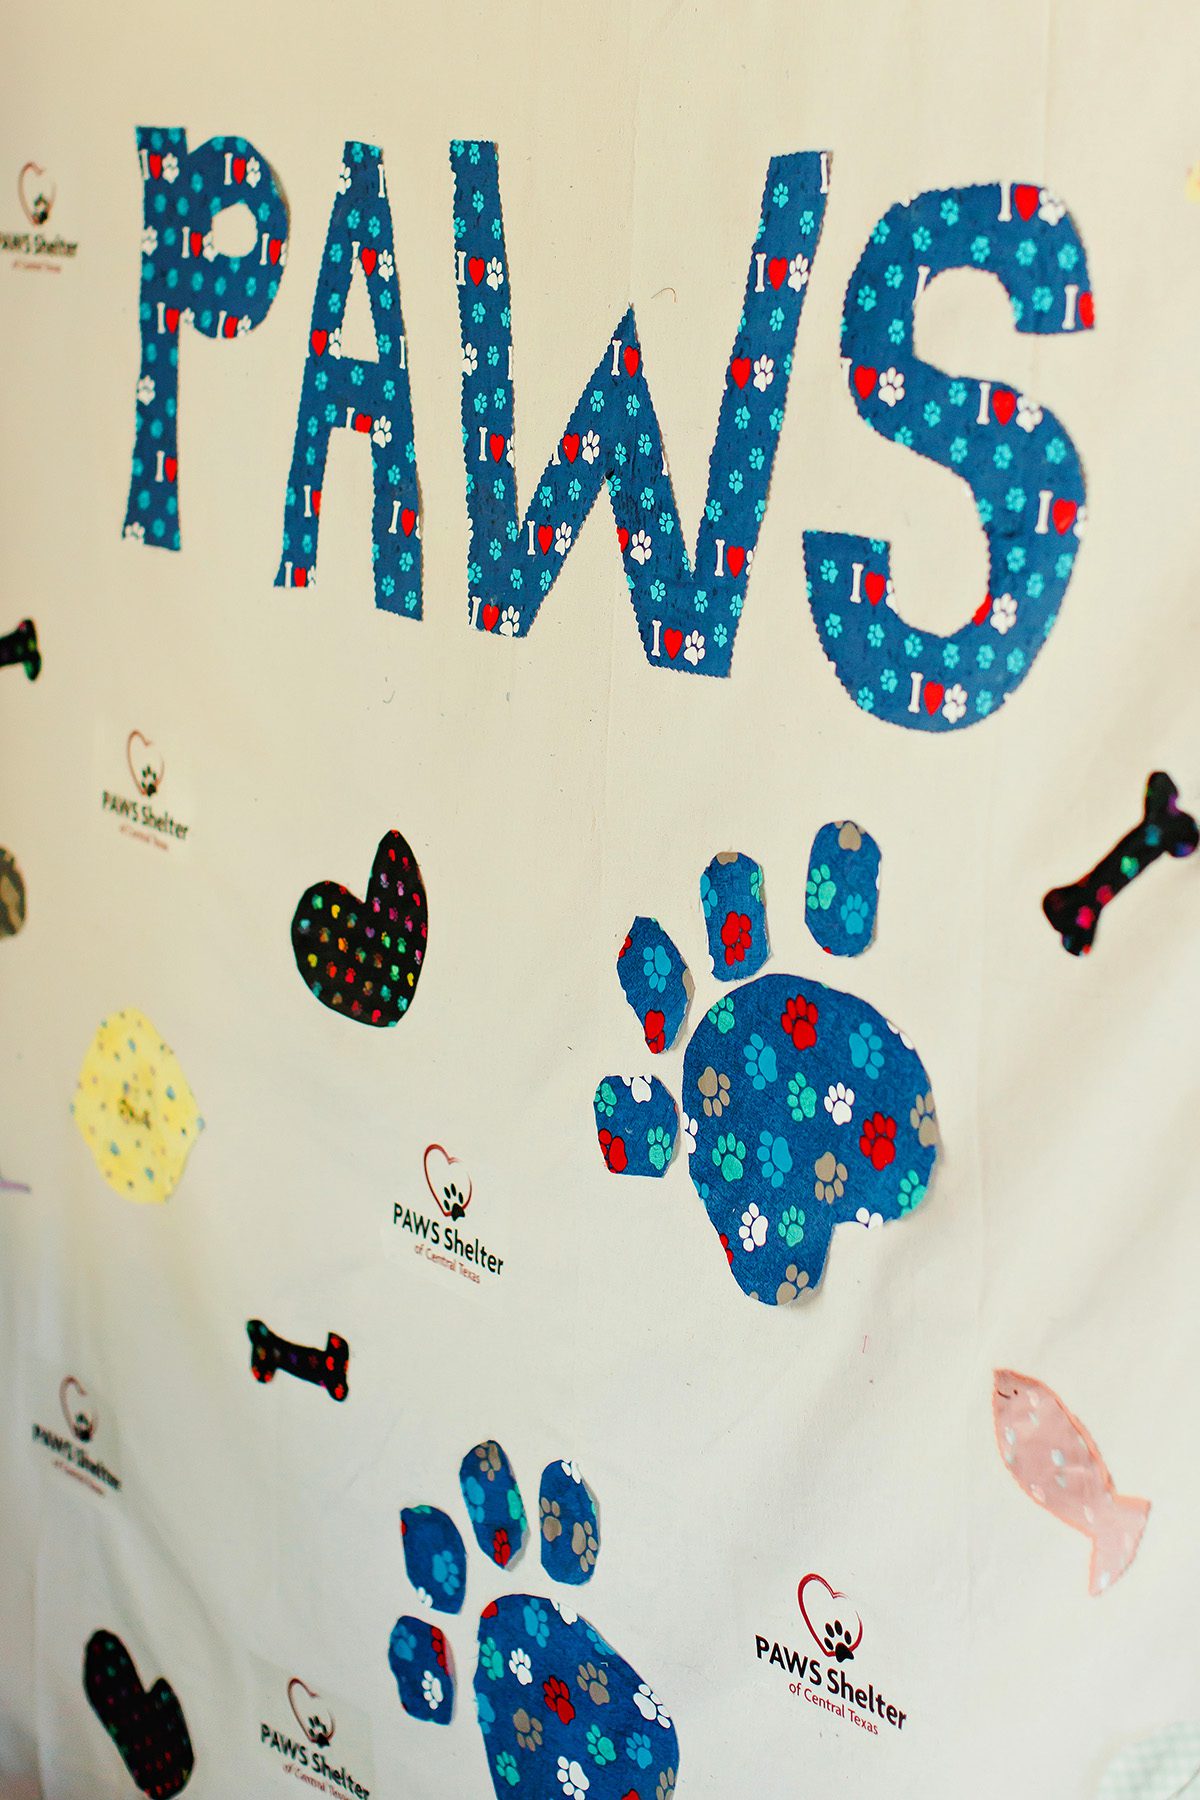 PAWS animal shelter Dripping Springs